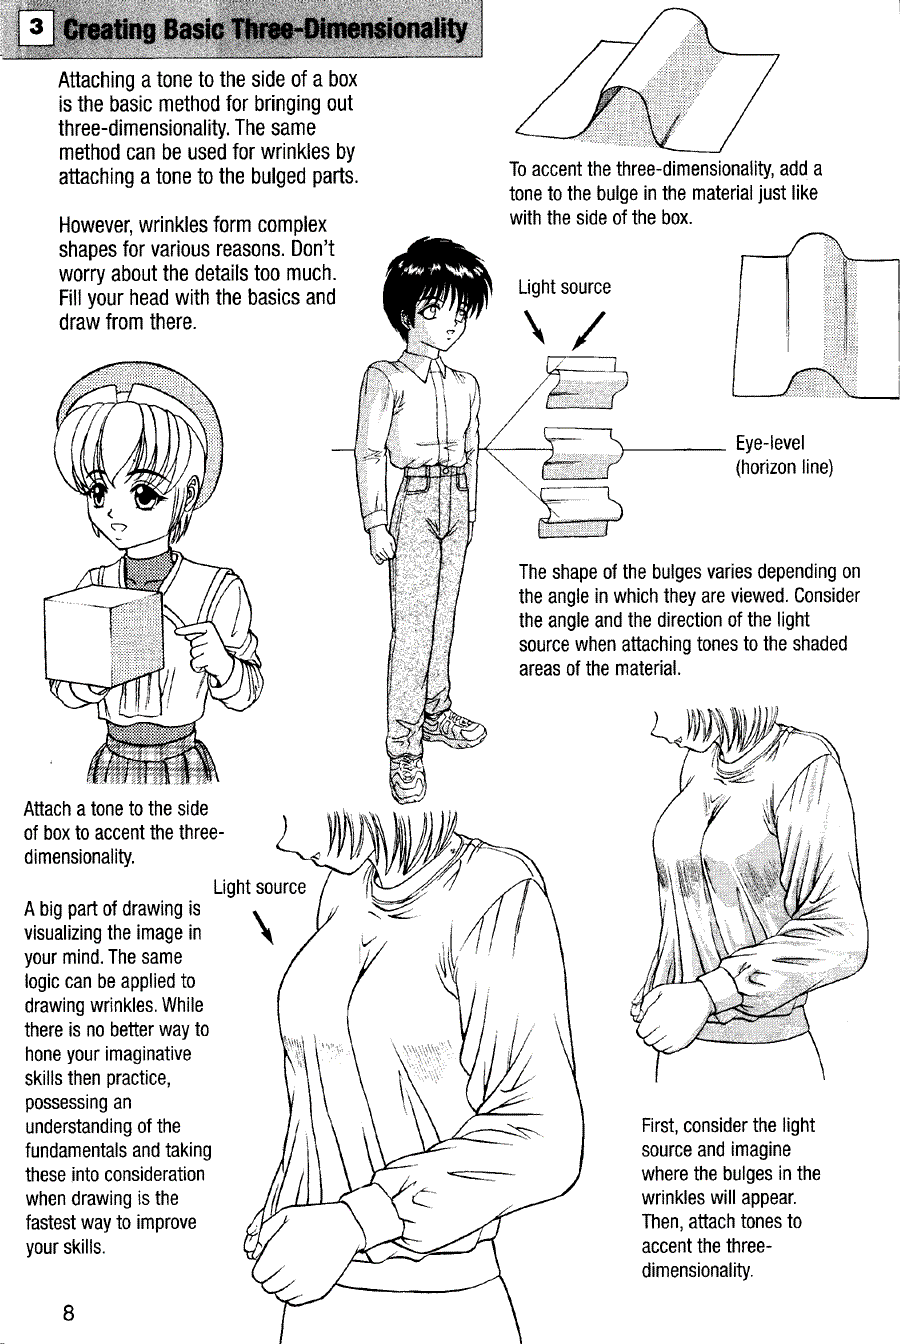 Now to draw Manga: Dressing your characters in casual wear - Now to draw Manga ></a>
<script language=JavaScript> 
  var txt = 